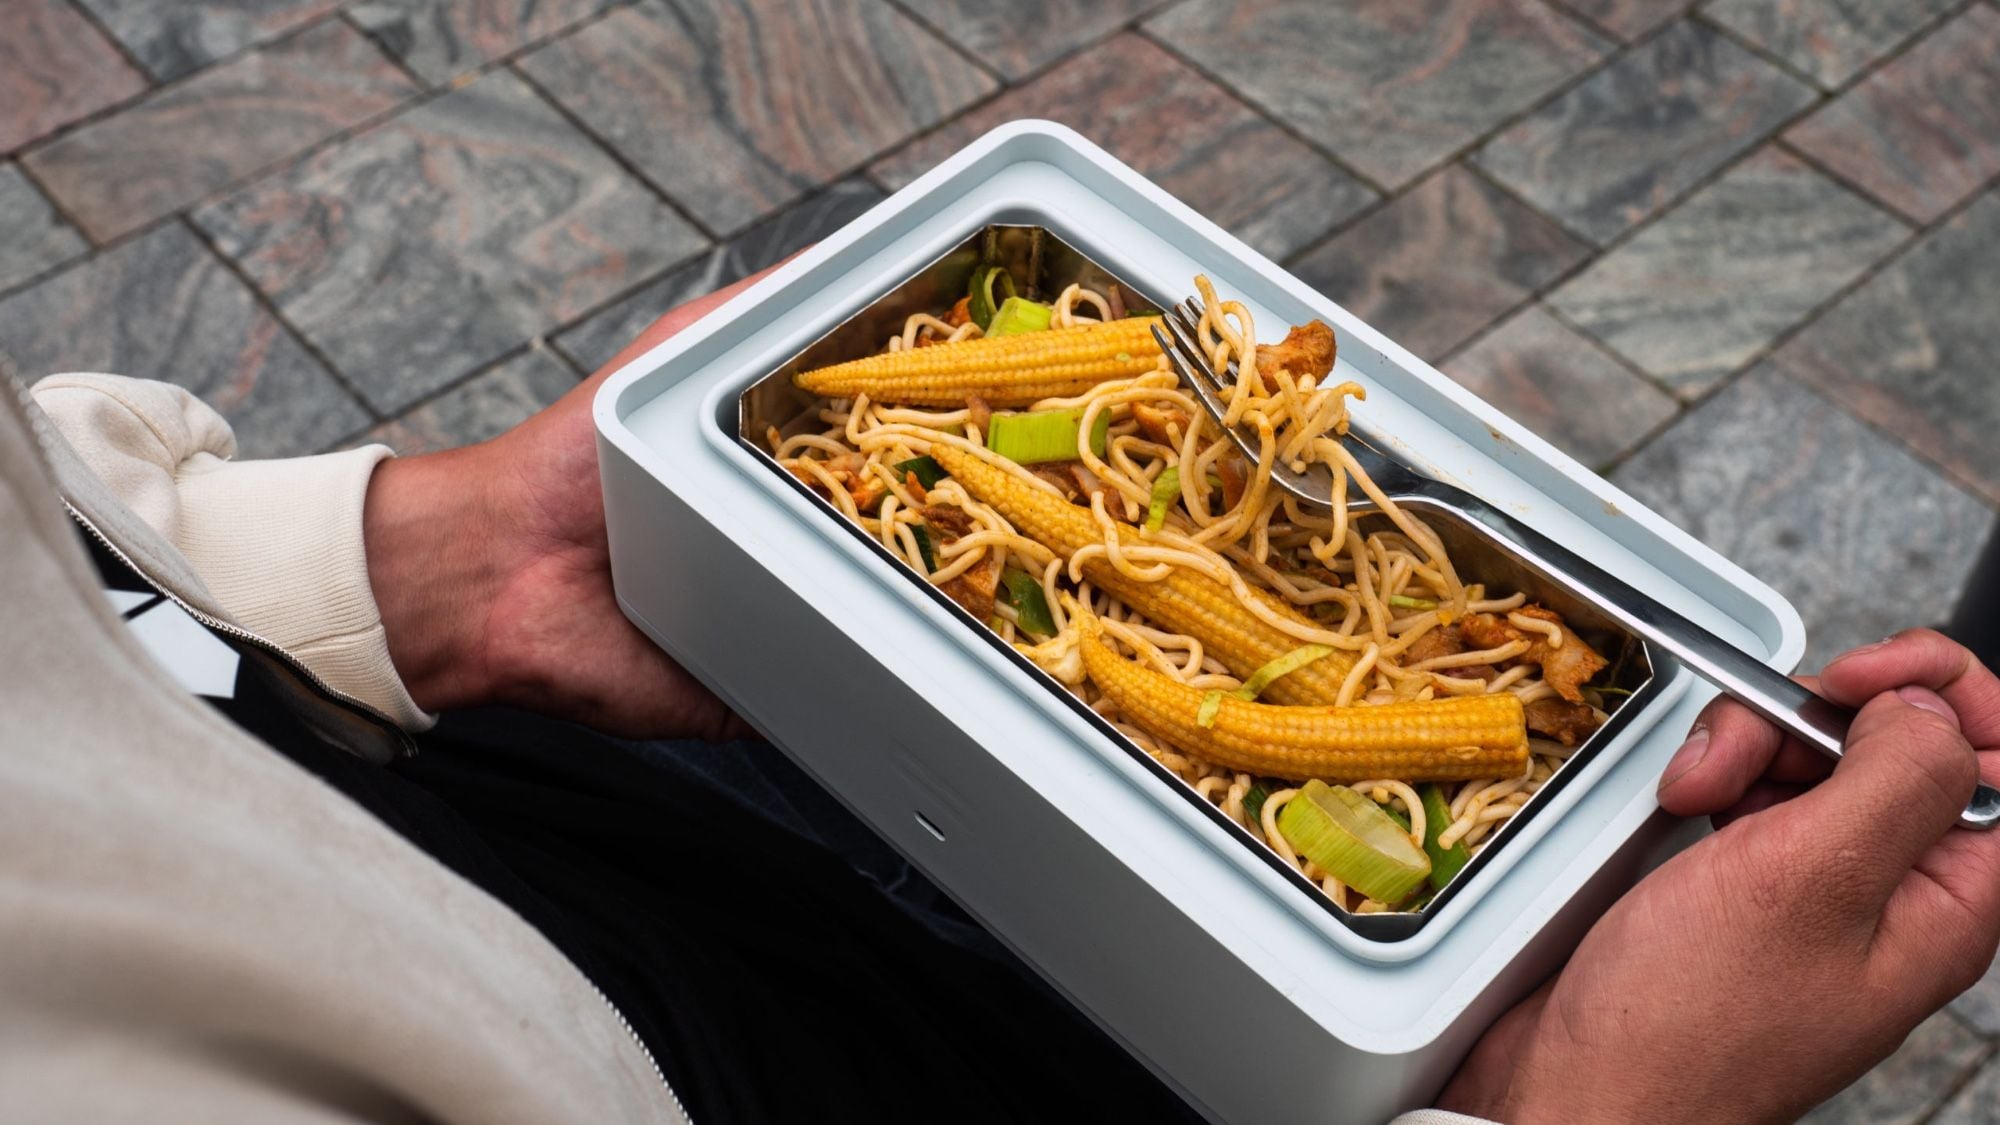 Enjoy hot meals straight from your Heatbox 